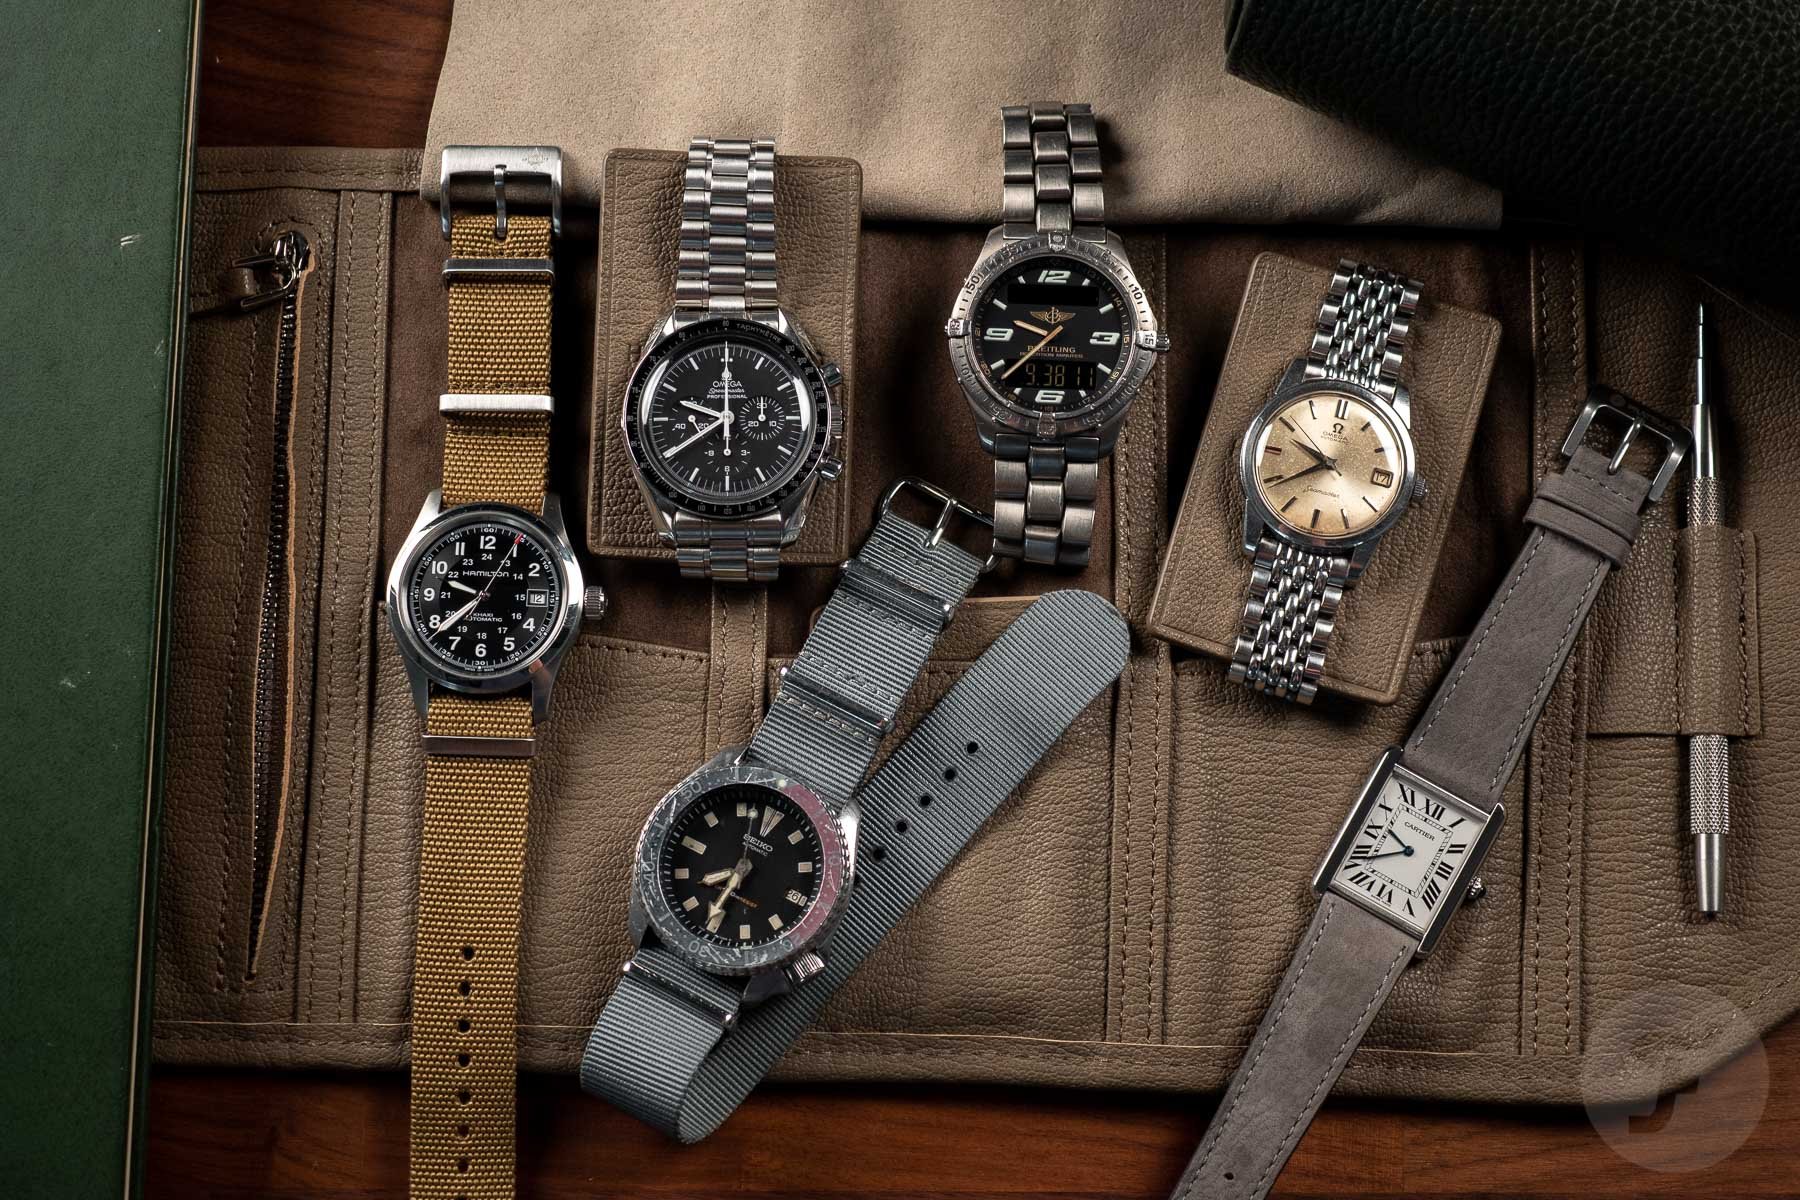 Tockr D-Day C-47 Watches Built with Salvaged WWII Aircraft Parts